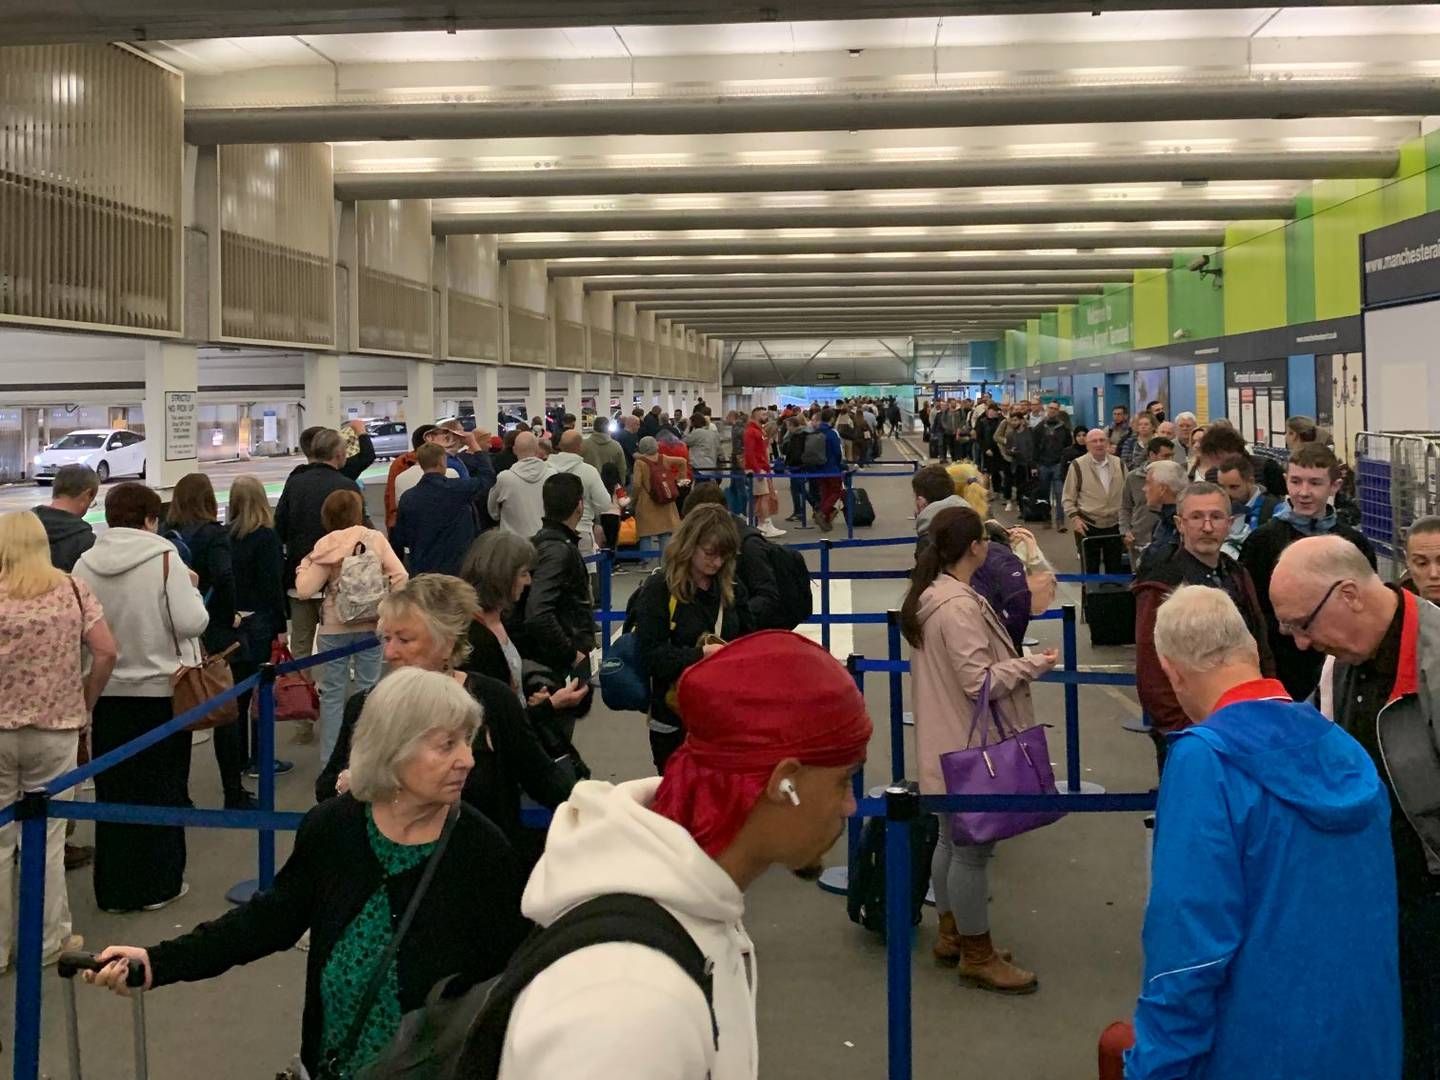 Lengthy queues formed at Manchester Airport as staff shortages continue to bite. Photo: Tim Warner / Twitter